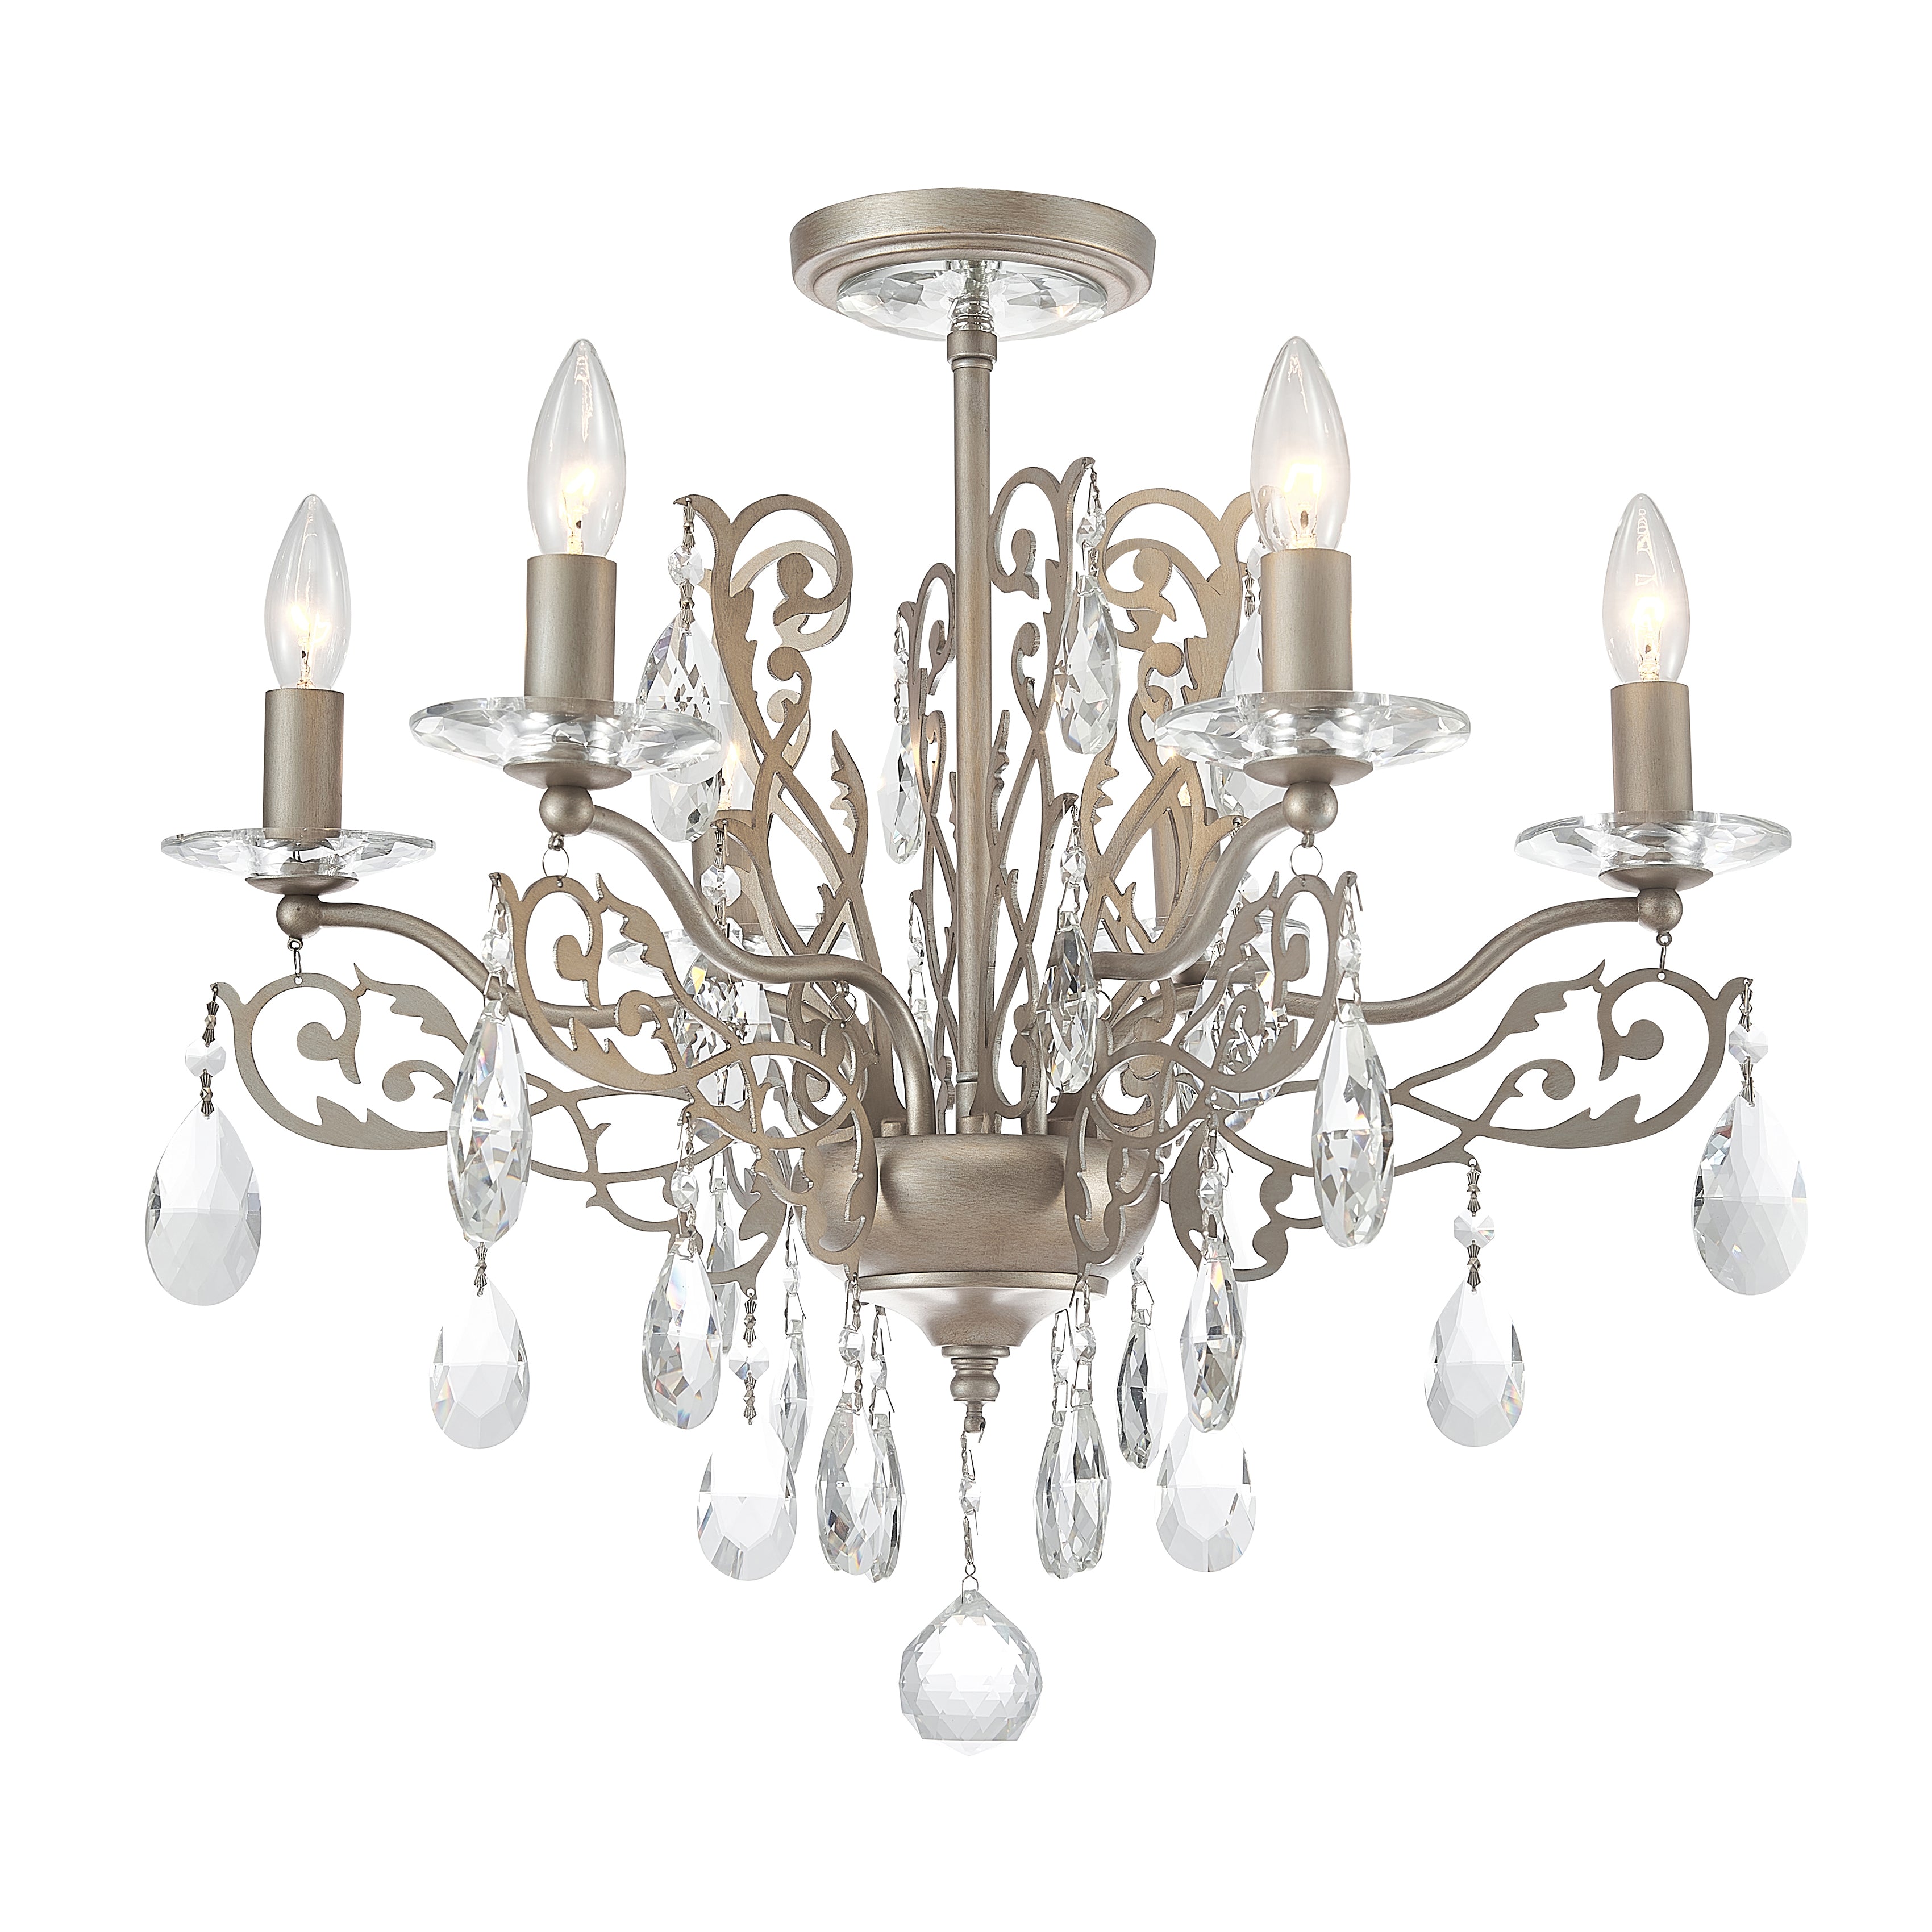 Easton Scroll French Country Crystal Chandelier